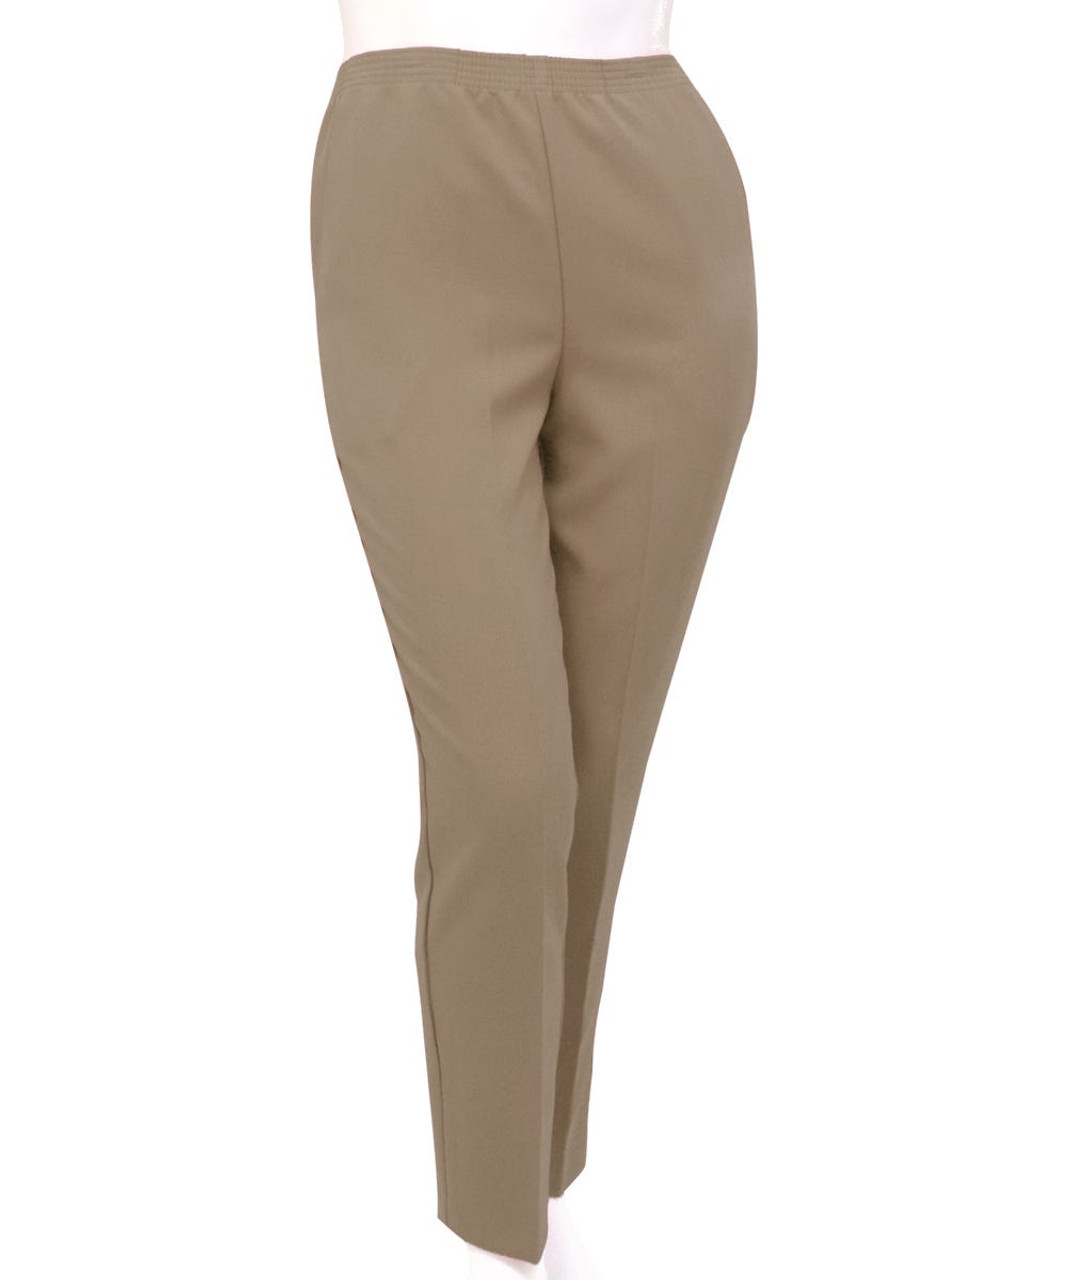 Silverts SV13090 Women's Pull On Pants - Elastic Waist Polyester Pants for Women Taupe, Size=40, SV13090-SV44-40